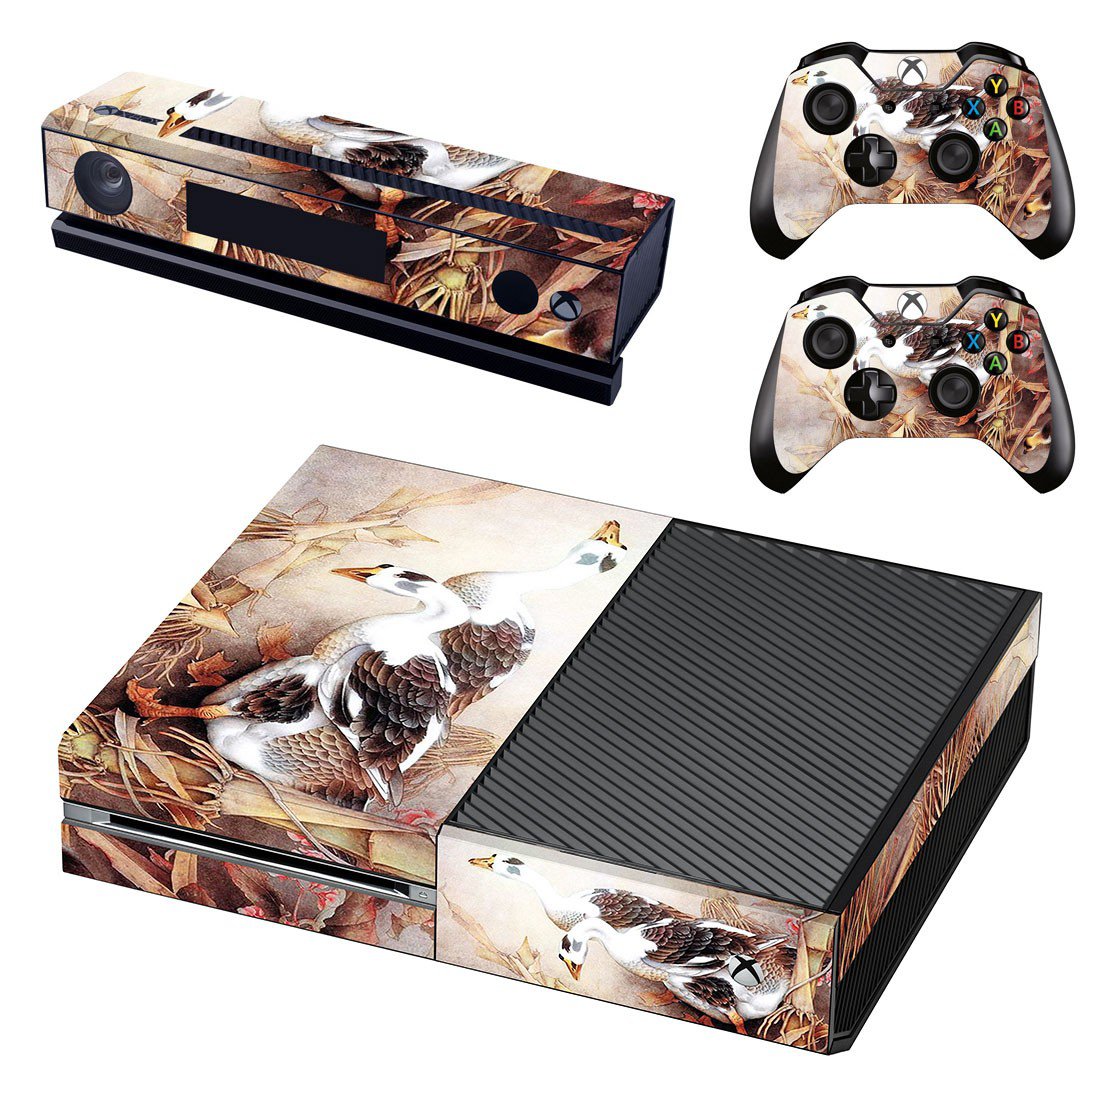 Xbox One And Controllers Skin Sticker - Swan